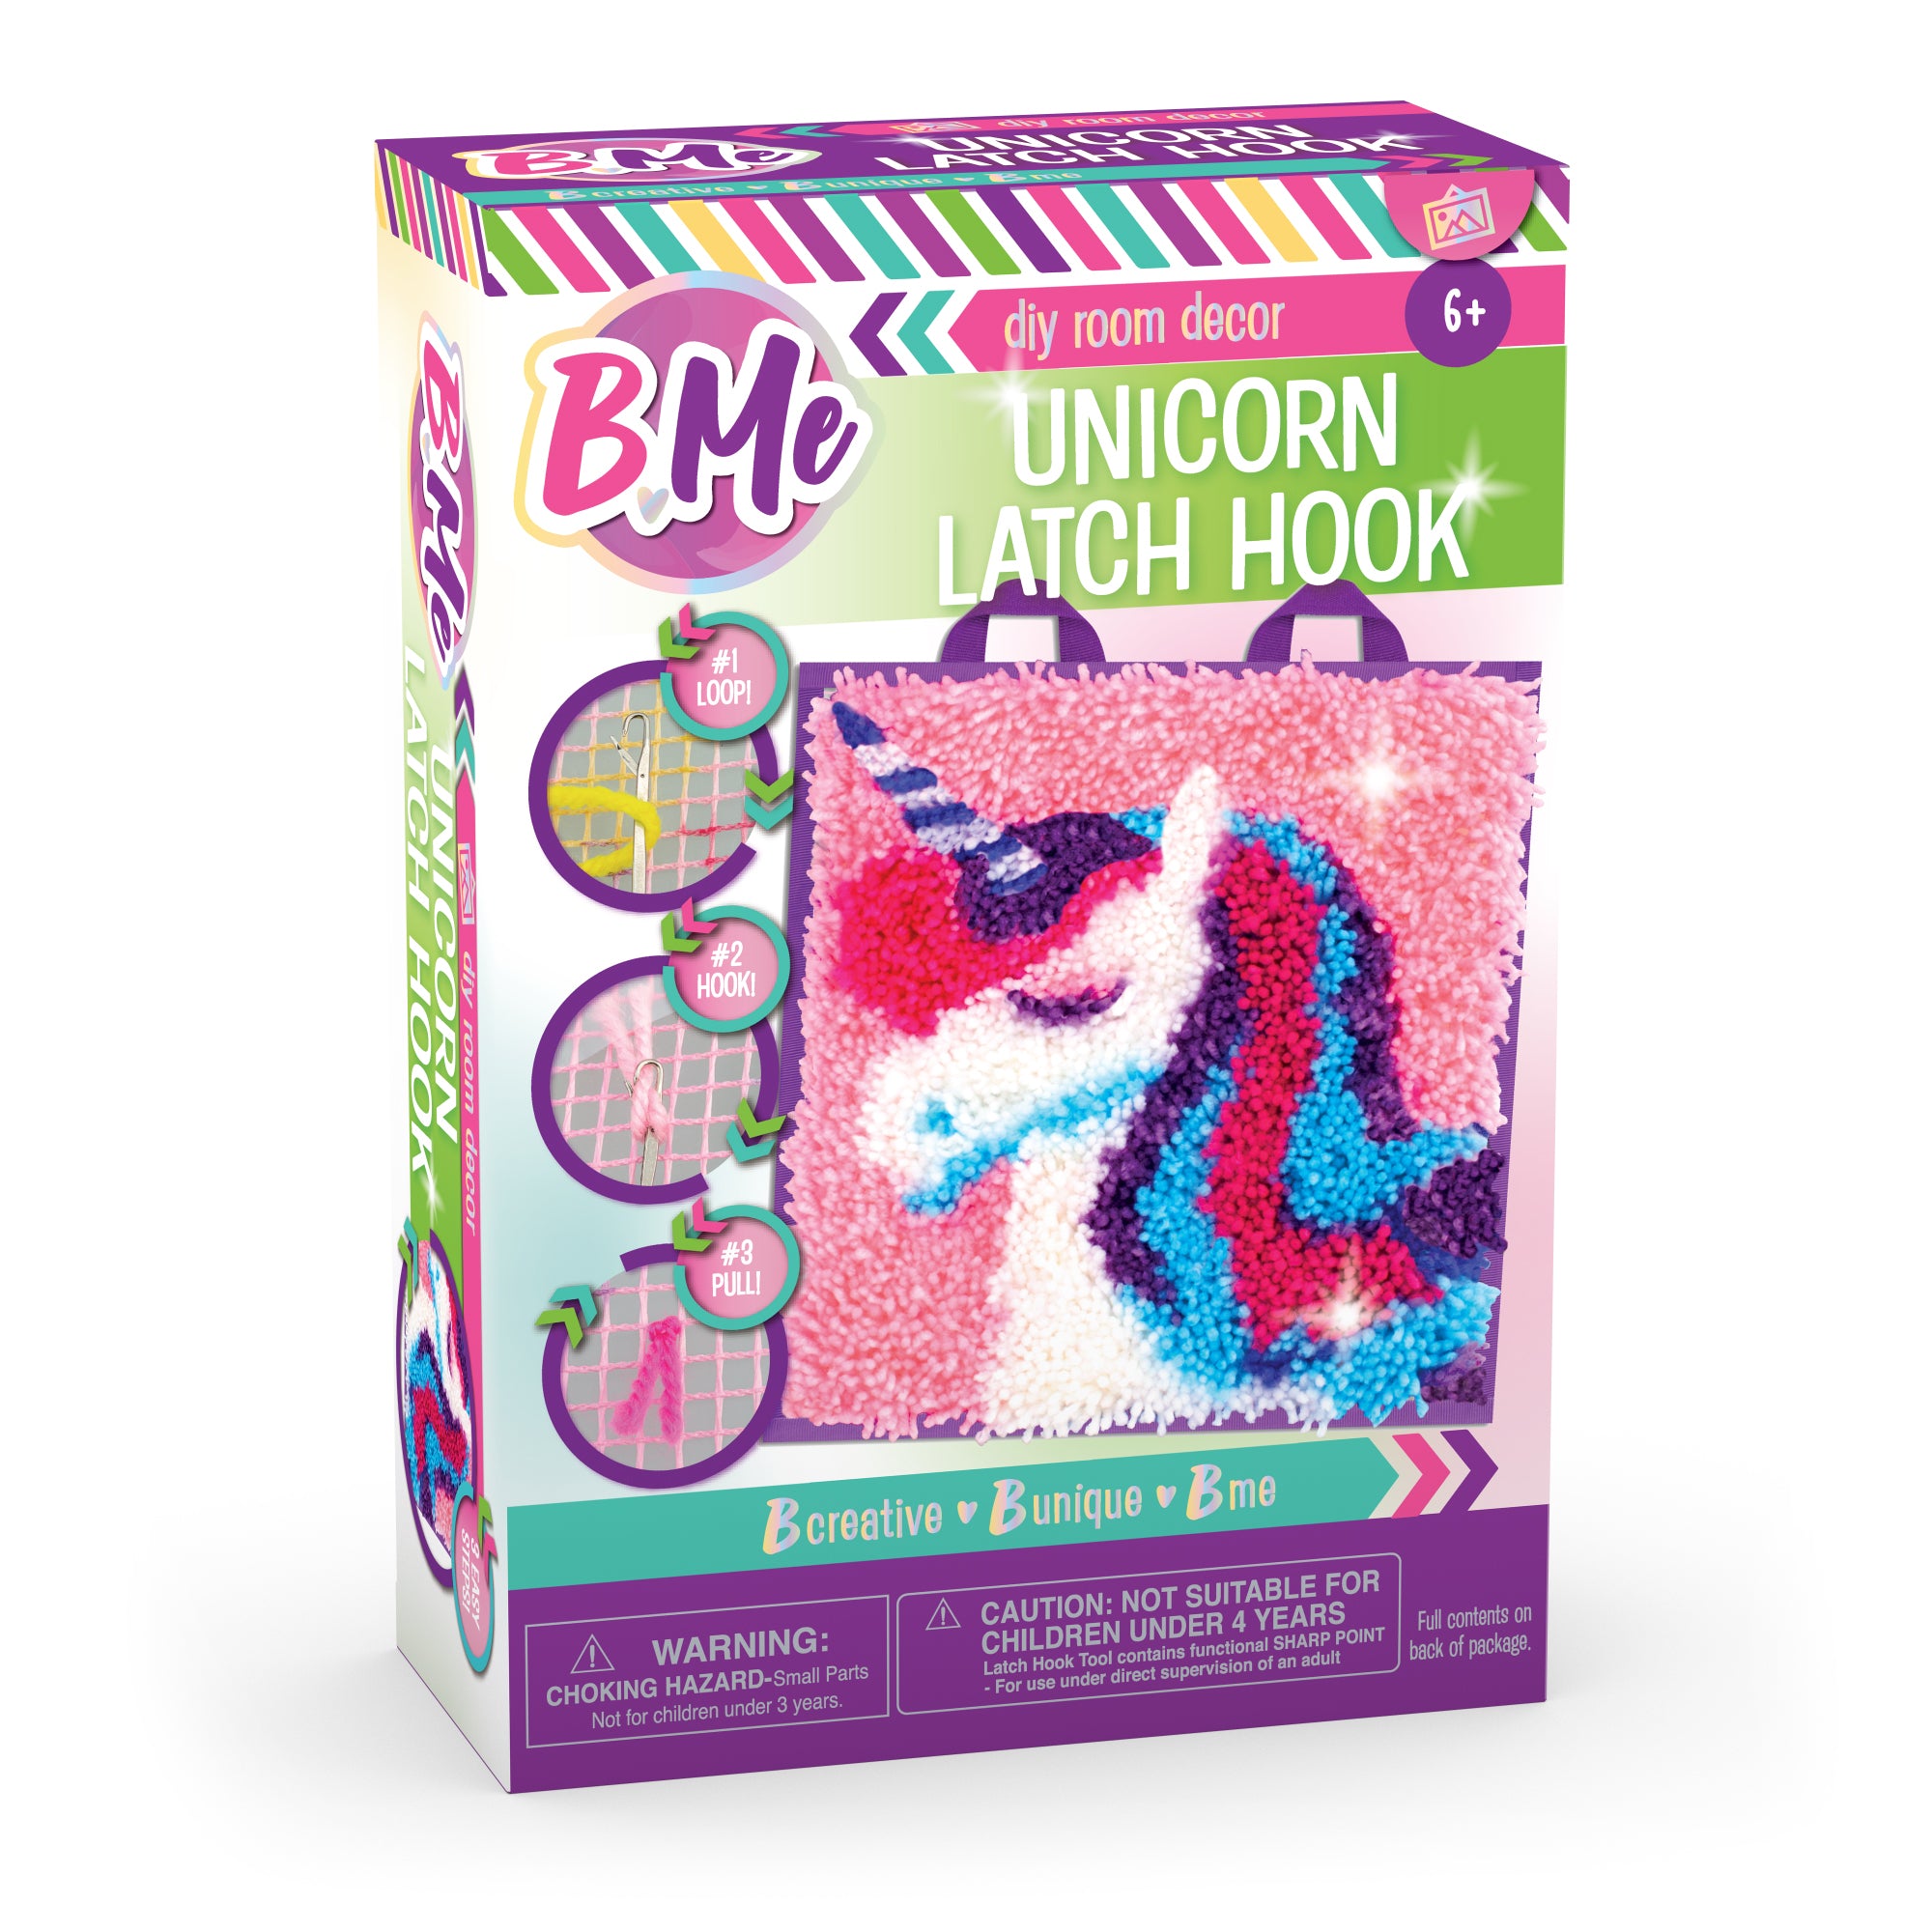 Unicorn Pillow Kit - No Sew Unicorn Craft Kit - Gifts for Girls, Arts and  Crafts for Kids Ages 8-12 - Unicorn Toys for 6 Year Old Girl Gifts